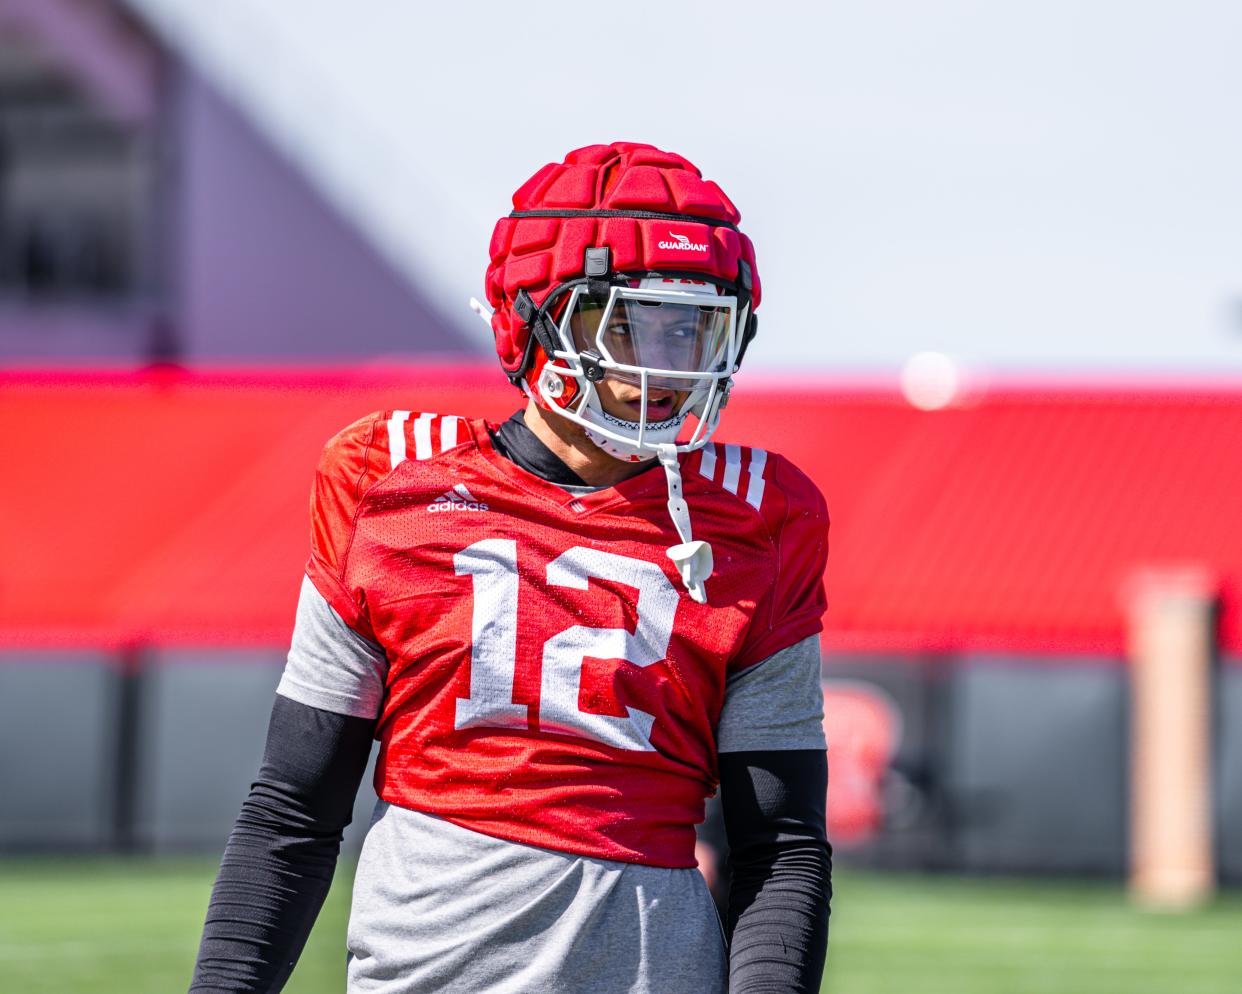 Rutgers football's Kenny Fletcher has moved over from defensive line to tight end. The Scarlet Knights are hoping Fletcher can become a weapon at the position.